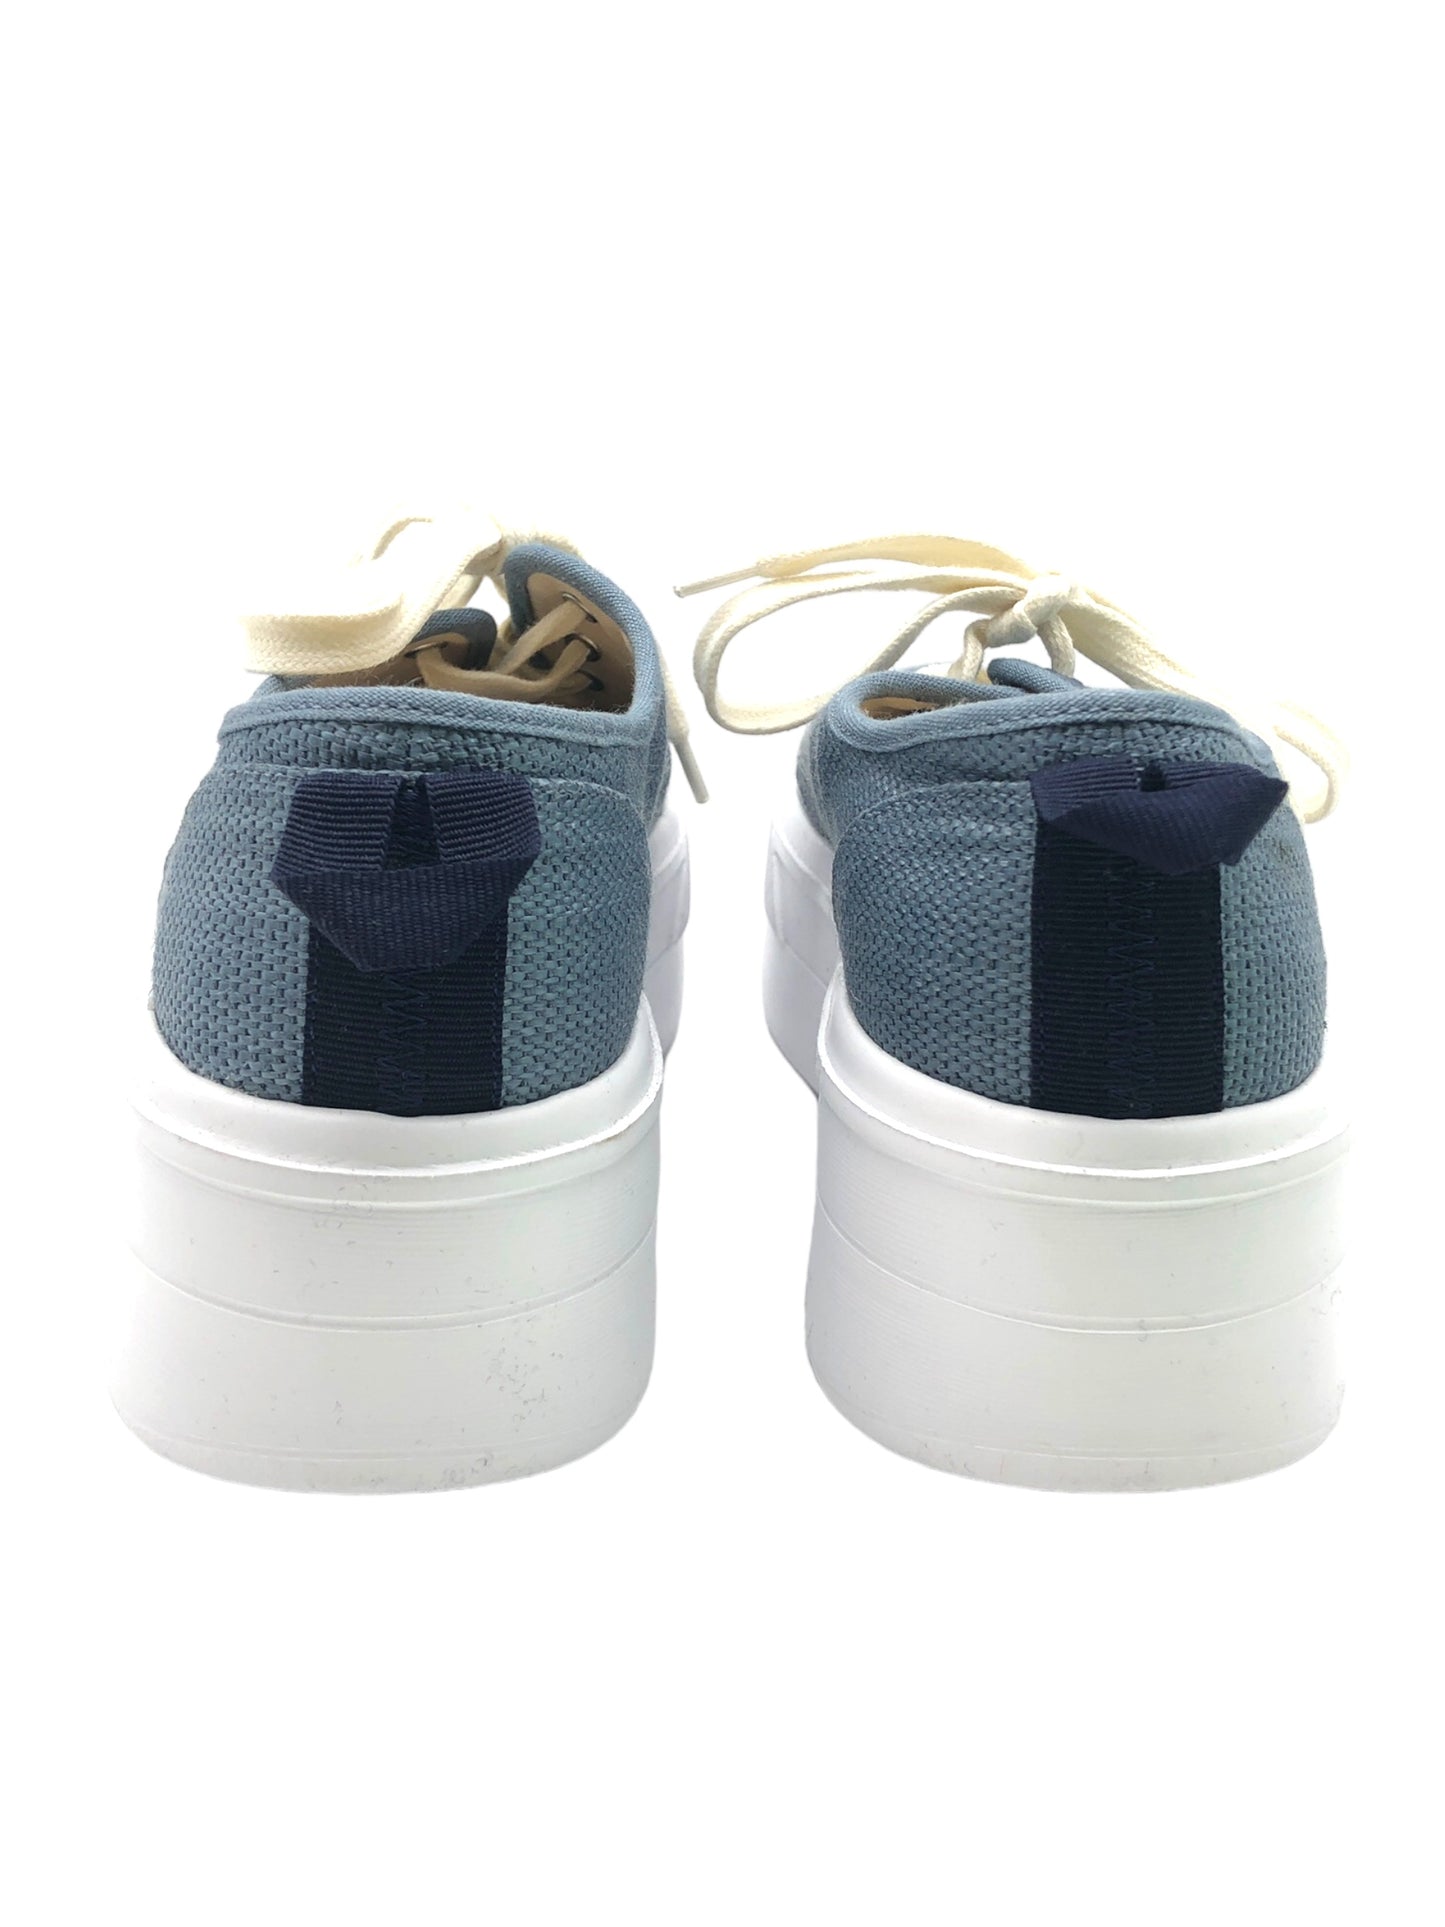 Shoes Sneakers By Lucky Brand  Size: 7.5